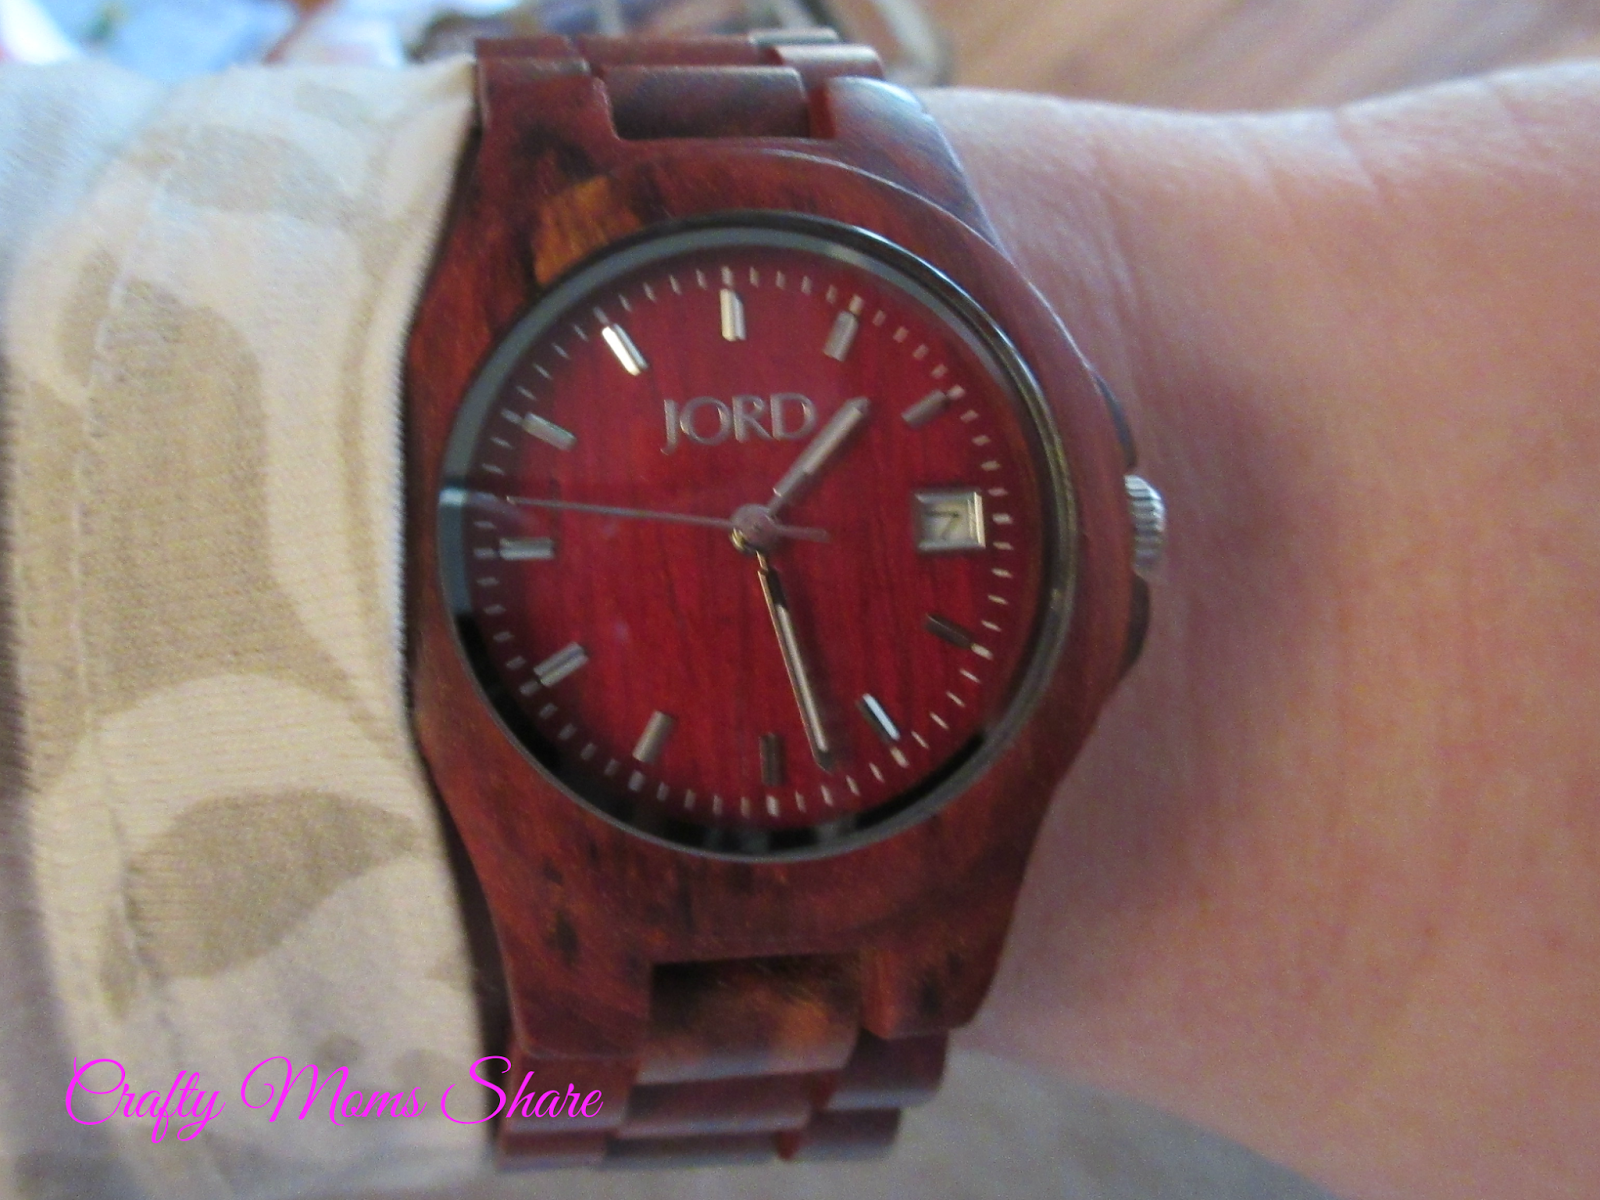 http://craftymomsshare.blogspot.com/2015/01/wooden-watch-review-and-giveaway.html